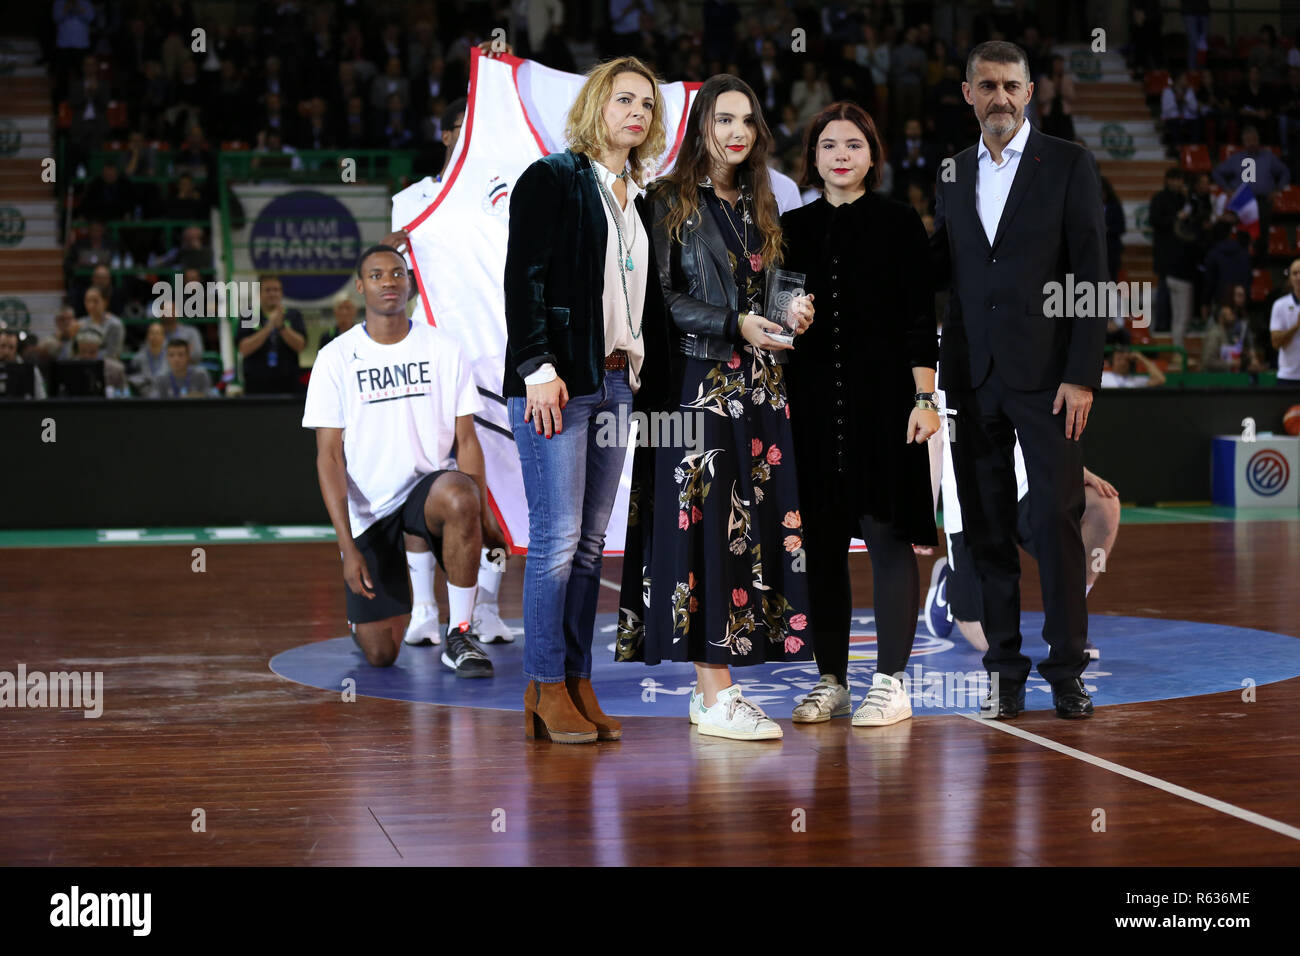 Limoges, France. 3rd Dec, 2018. A Tribute is paid to Frédéric Forte,  emblematic Limoges and France player, in presence of his widow and two  daughter, accompanied by the FFBB president Jean-Pierre Siutat.